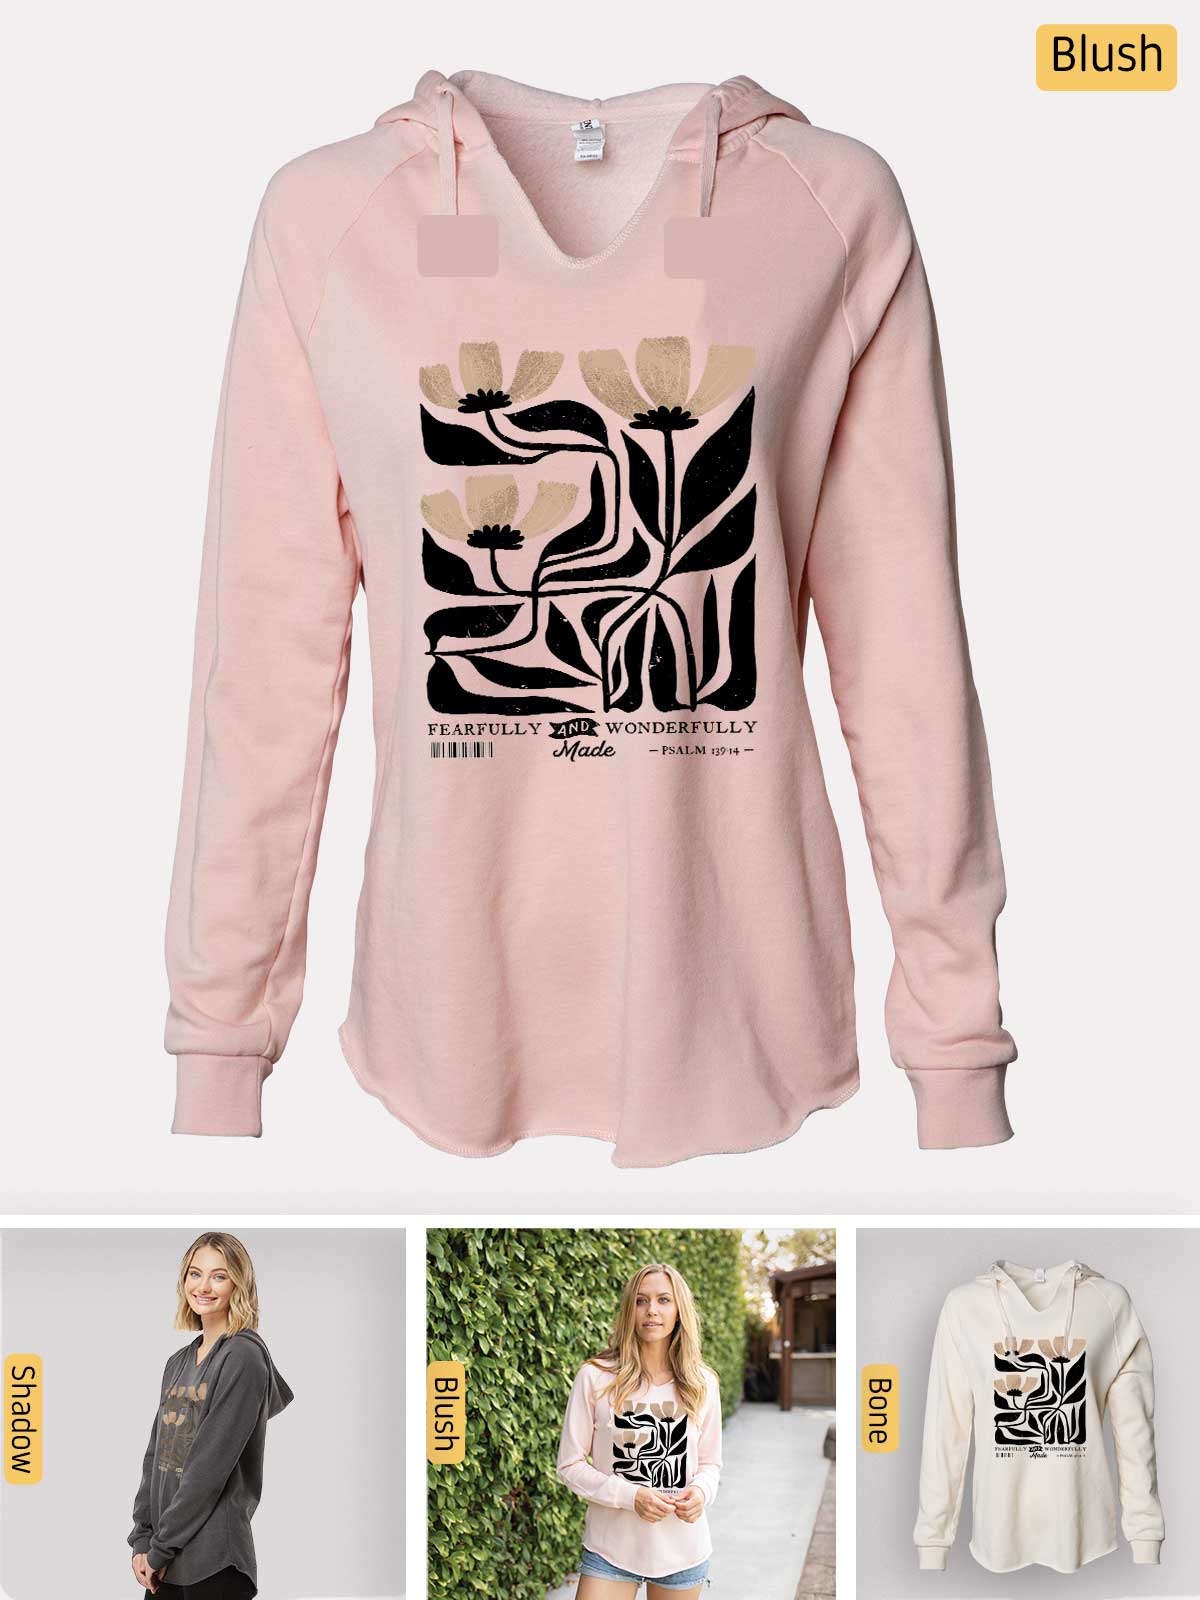 a women's sweatshirt with a graphic on it